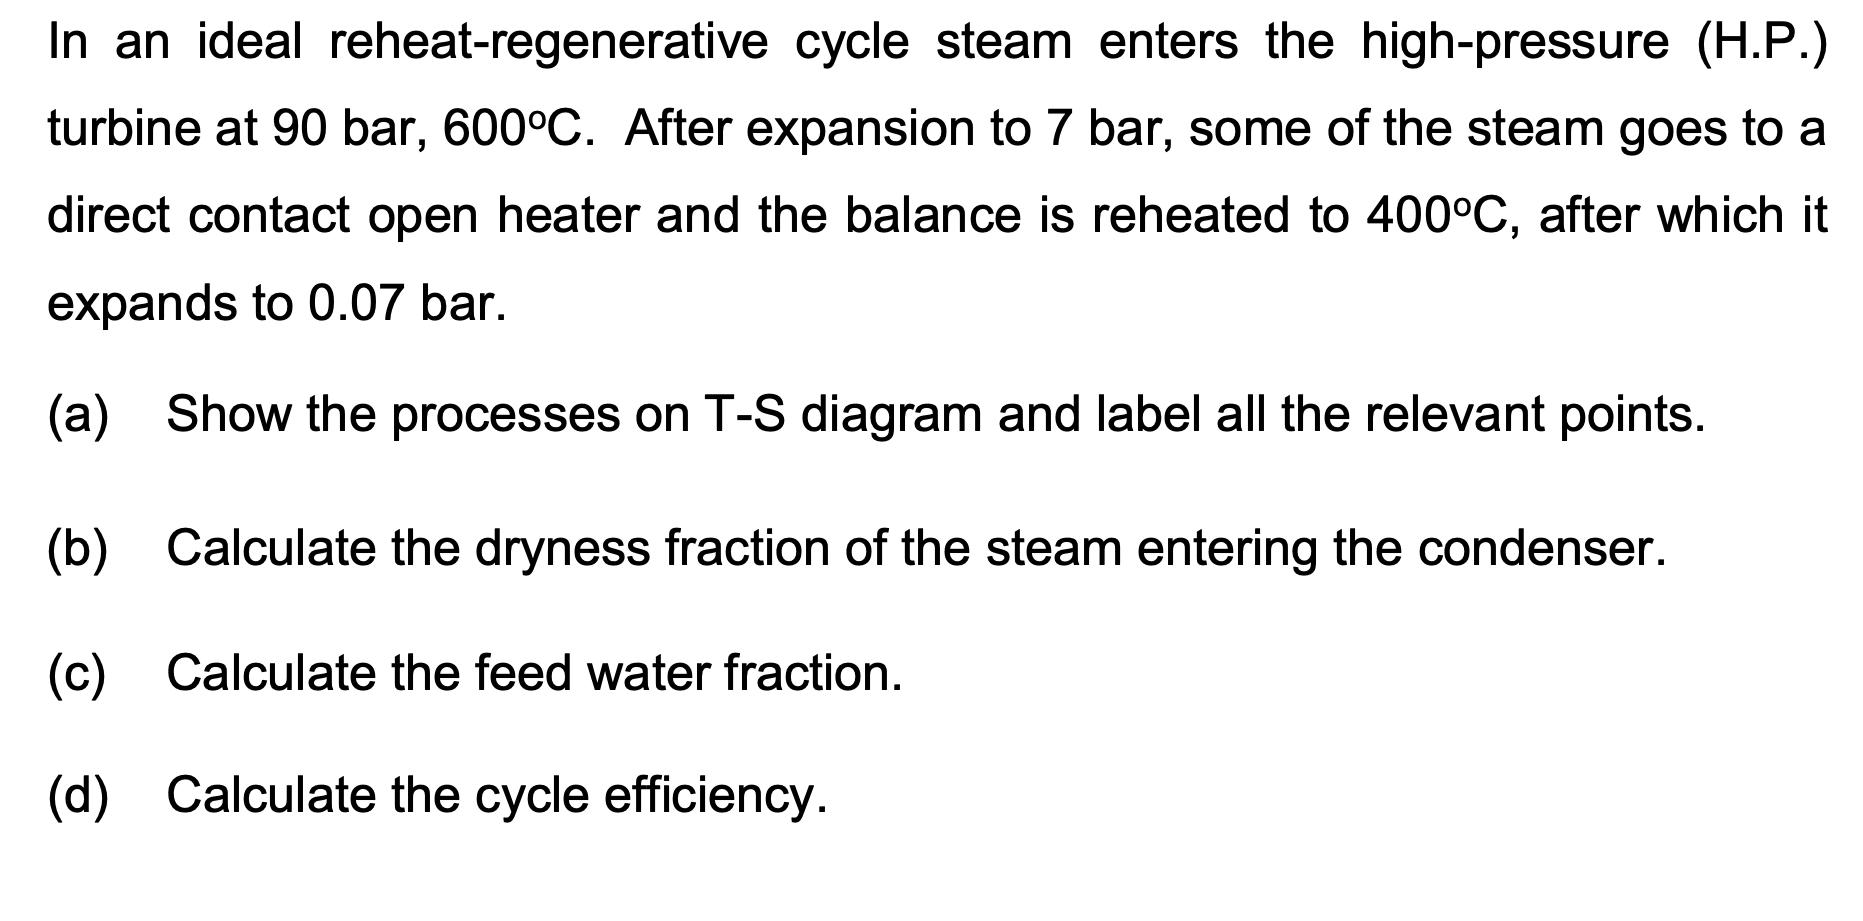 In an ideal reheat-regenerative cycle steam enters the high-pressure (H.P.) turbine at 90 bar, 600C. After